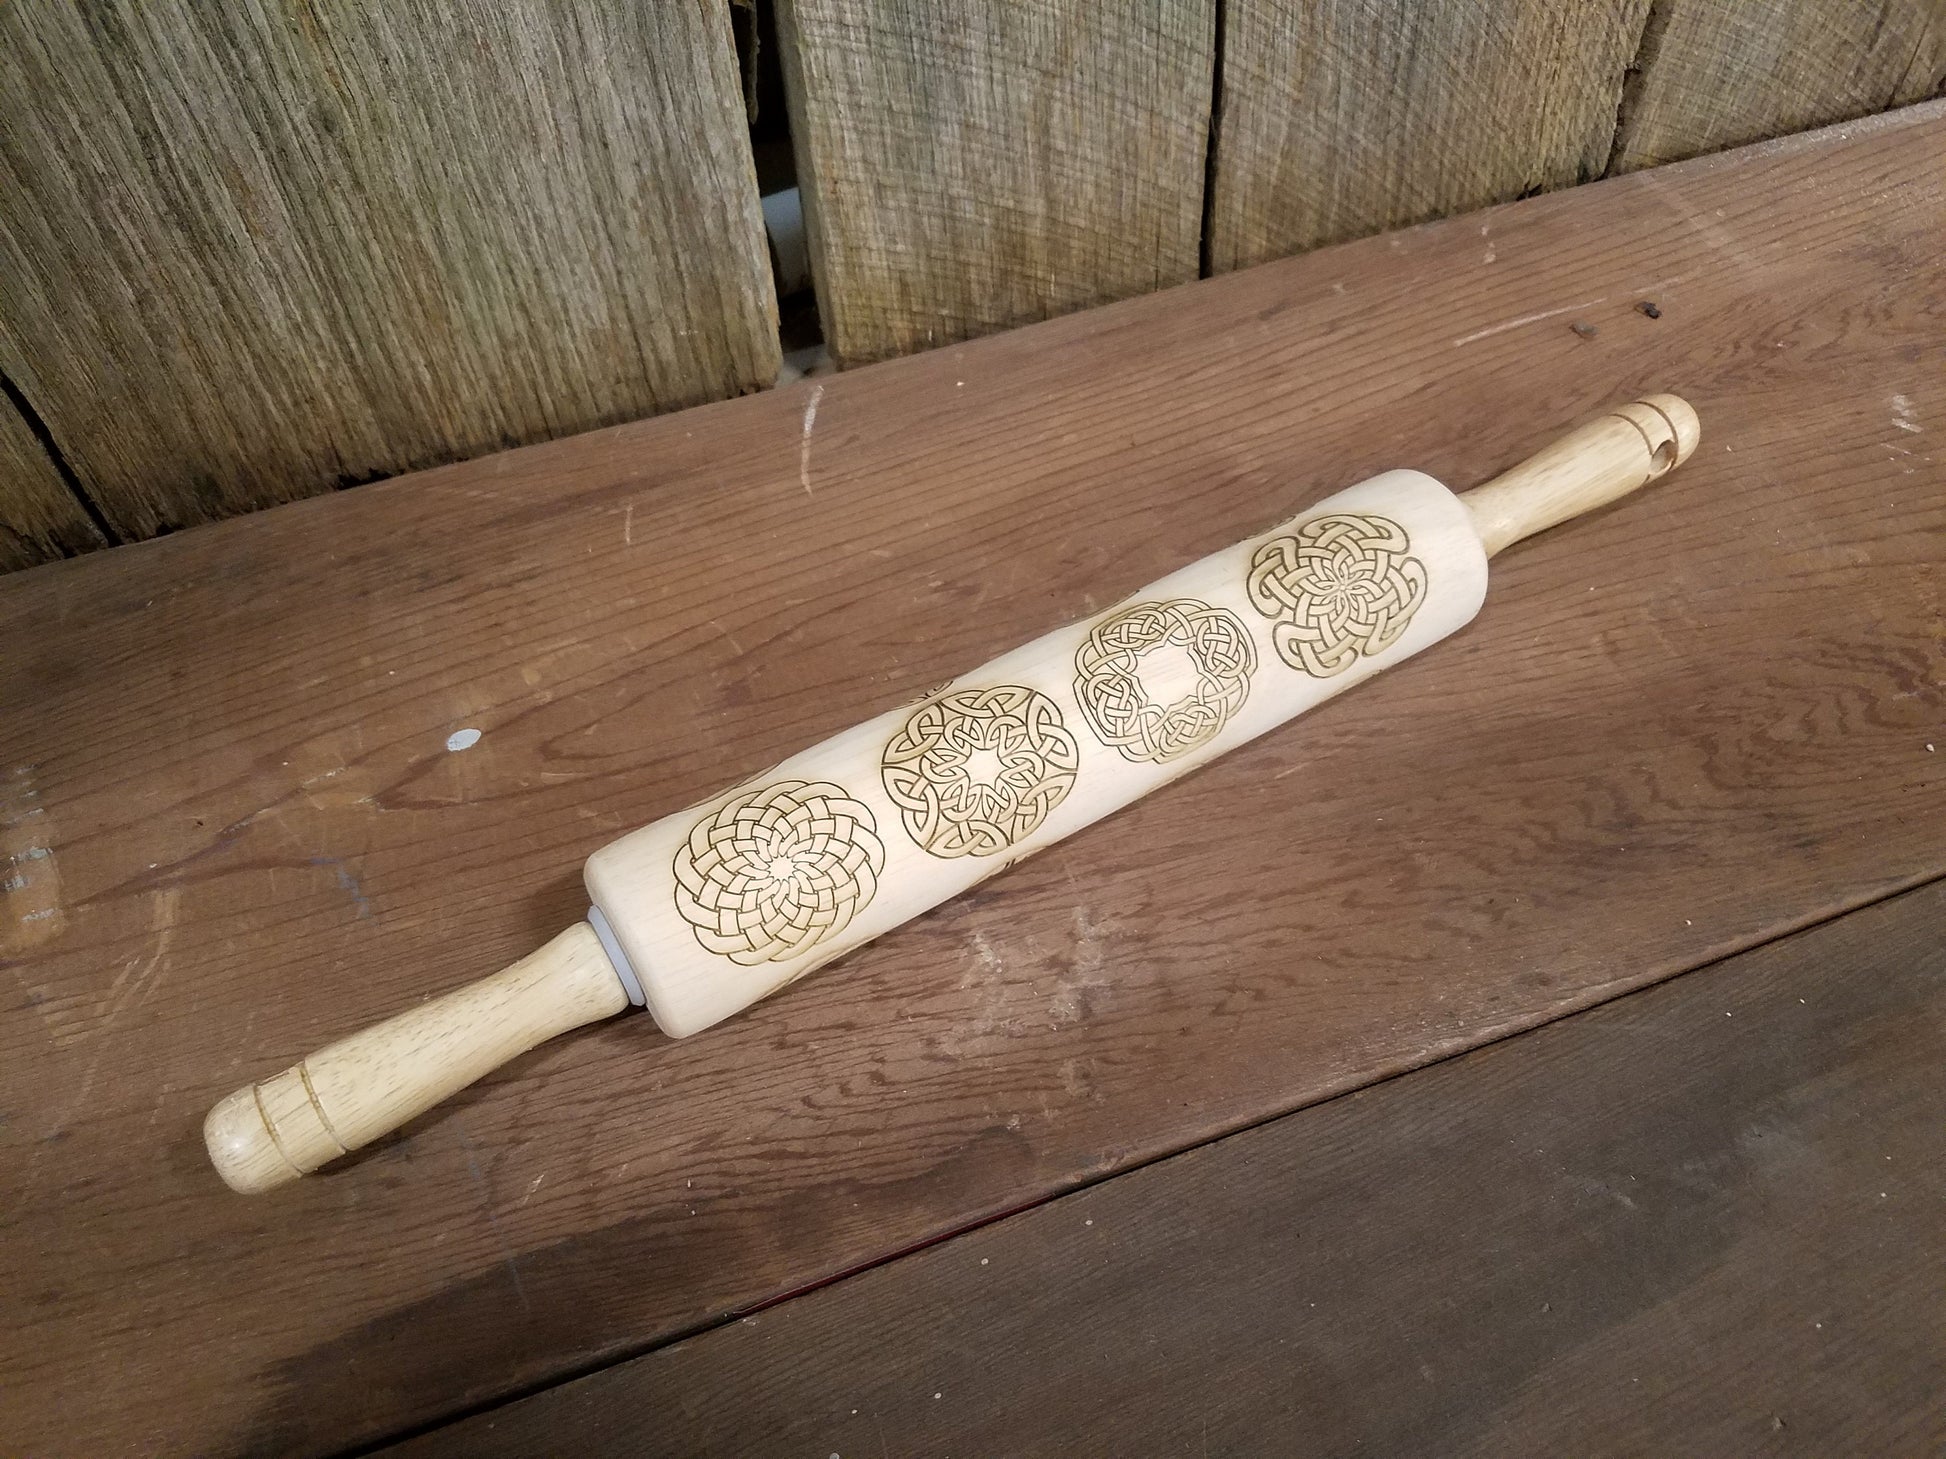 Celtic Knot, Tribal, Knot Work, Geometric, Irish, Texture, 10 Inch Rolling Pin, Gift, Embossed, Engraved, Wood, Cookie Stamp, pottery